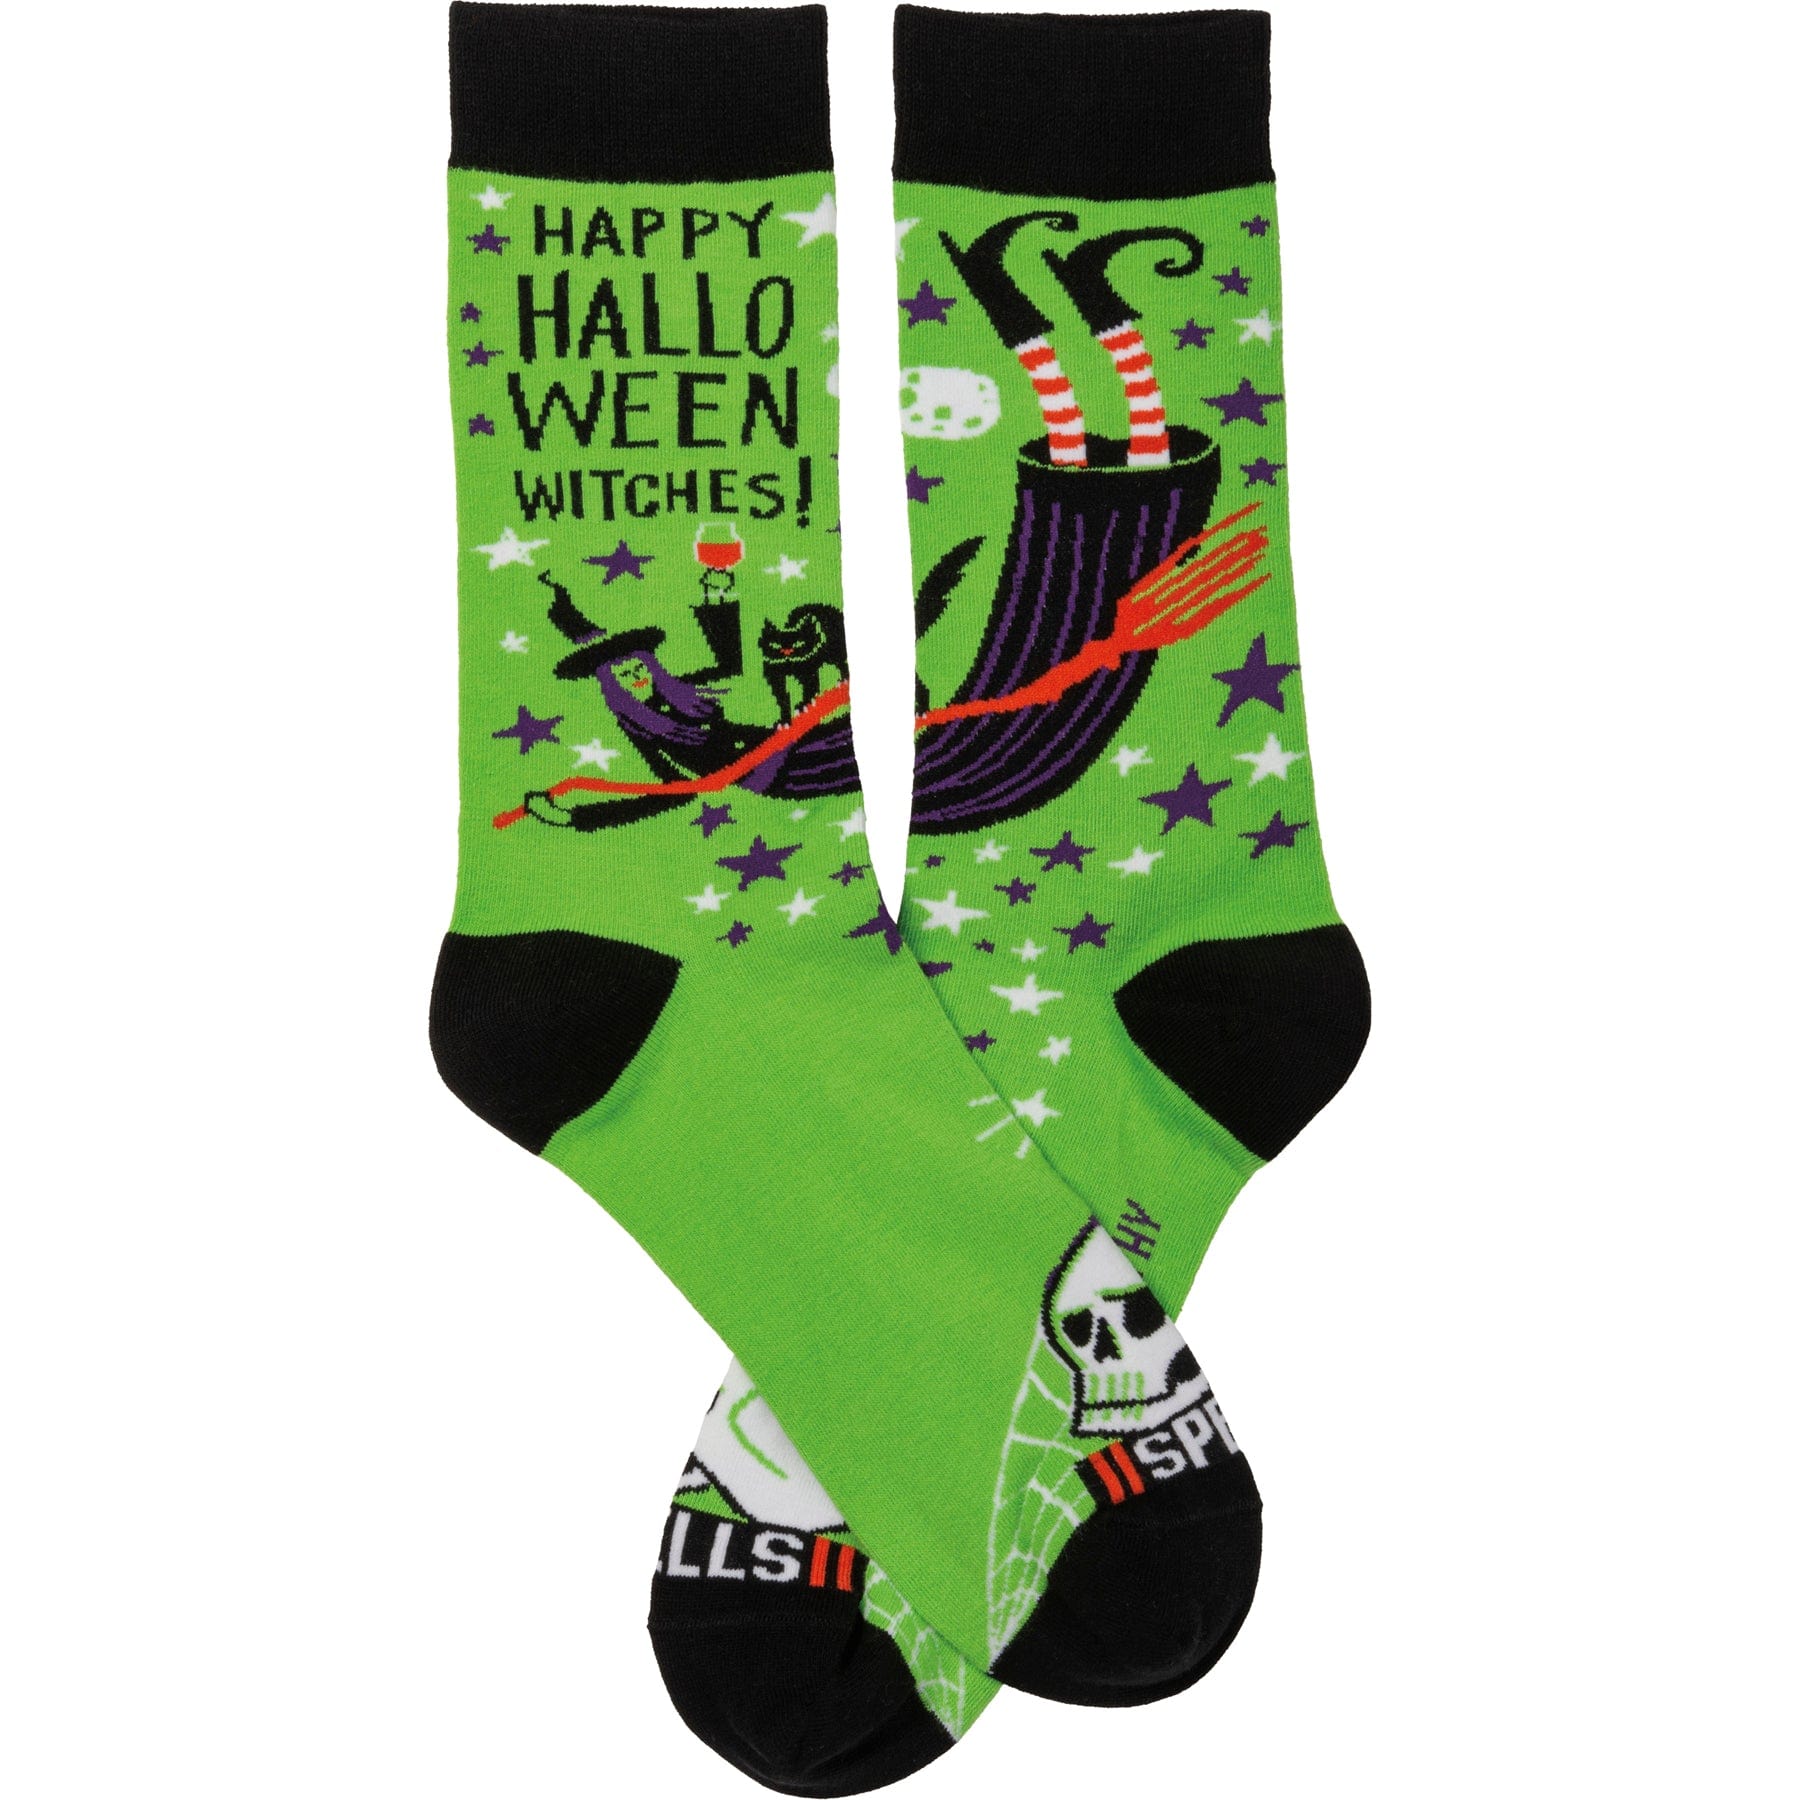 Socks One Size Fits Most Socks - Happy Halloween Witches PBK-107503